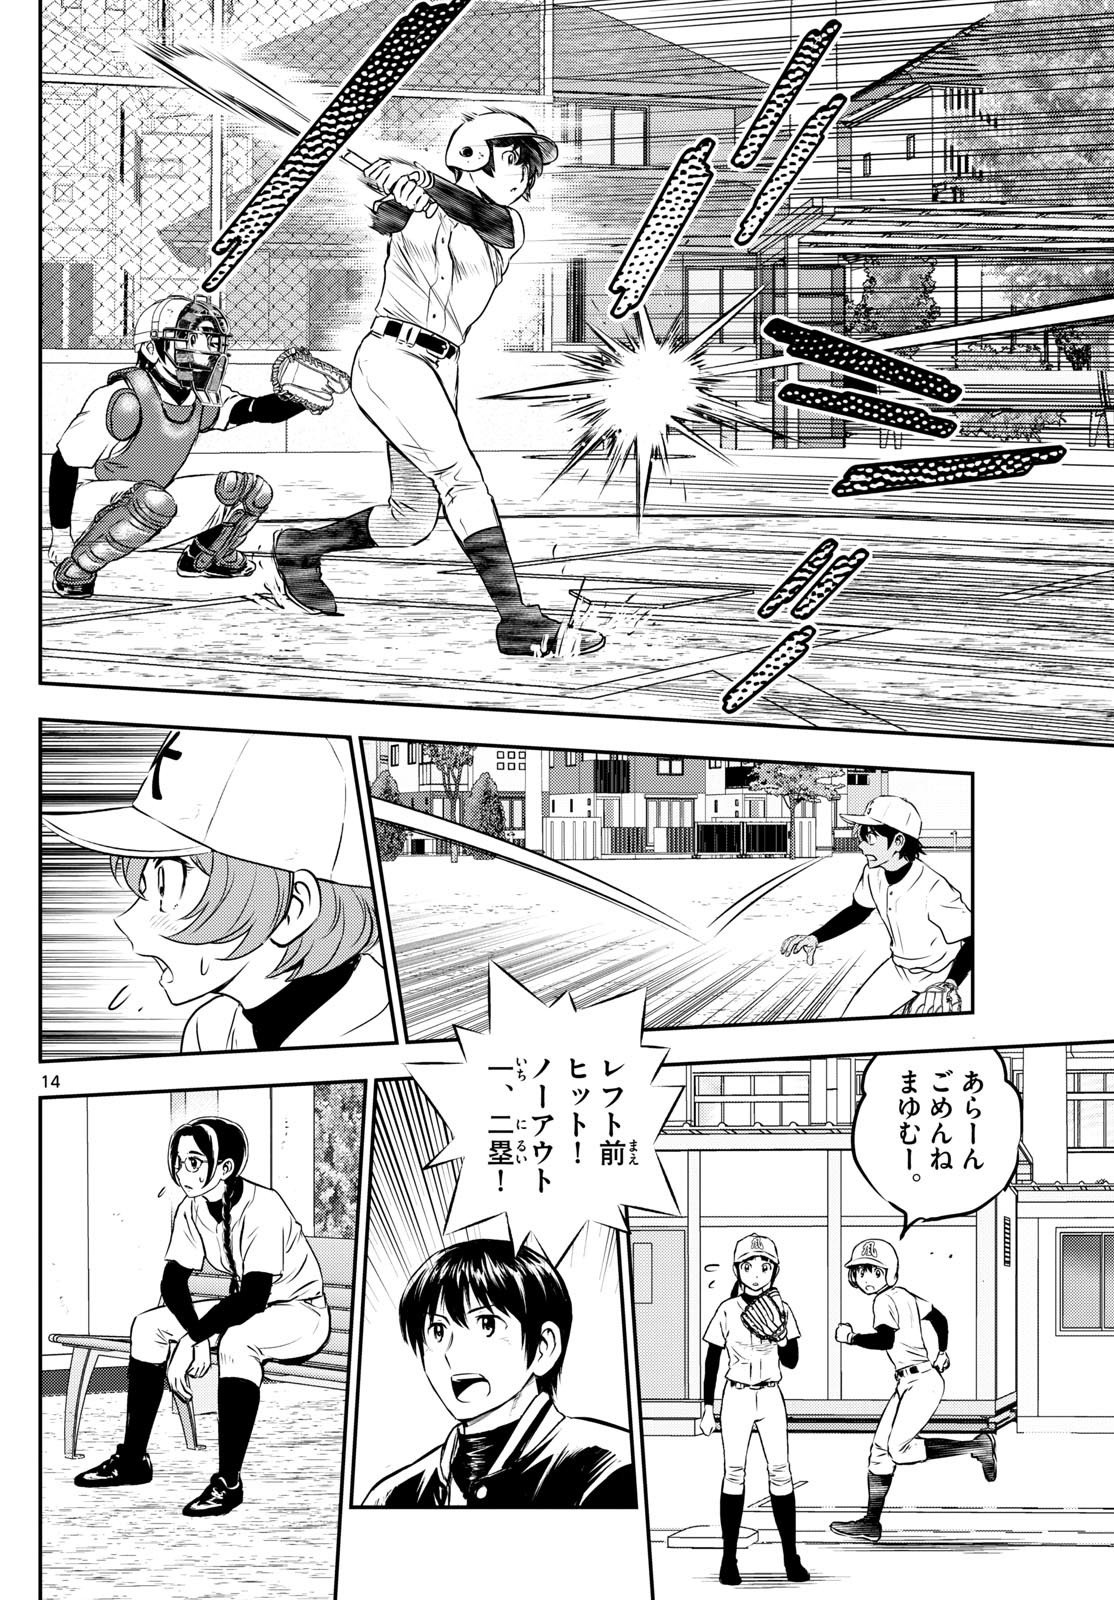 Major 2nd - メジャーセカンド - Chapter 280 - Page 14